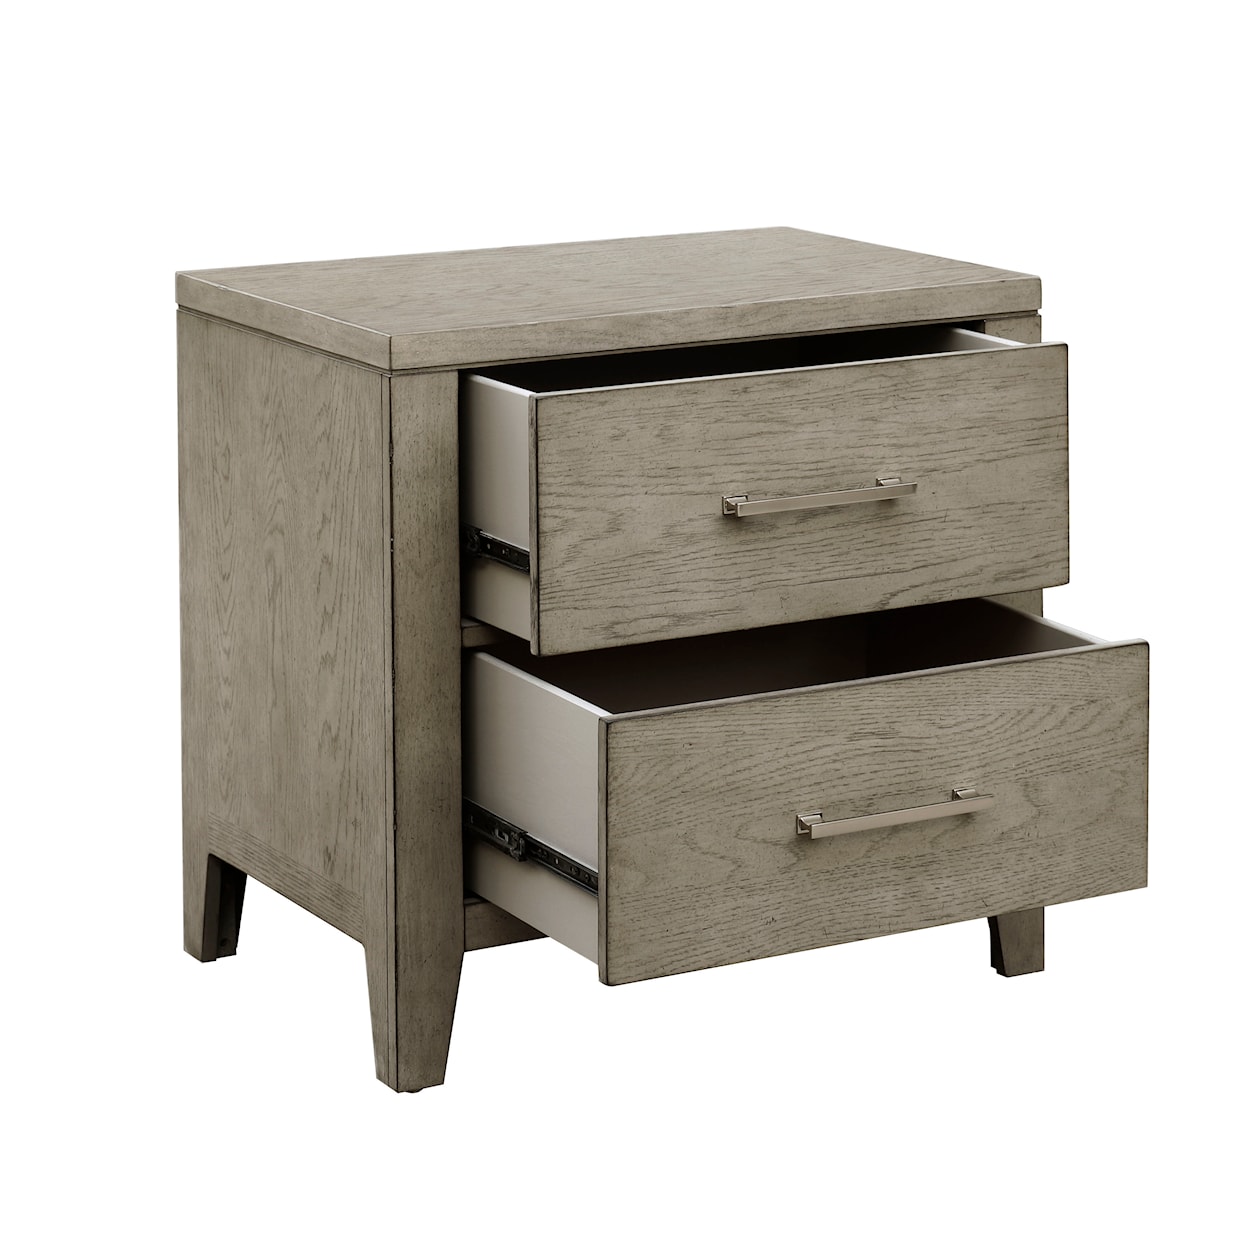 Samuel Lawrence Essex by Drew and Jonathan Home Essex Nightstand